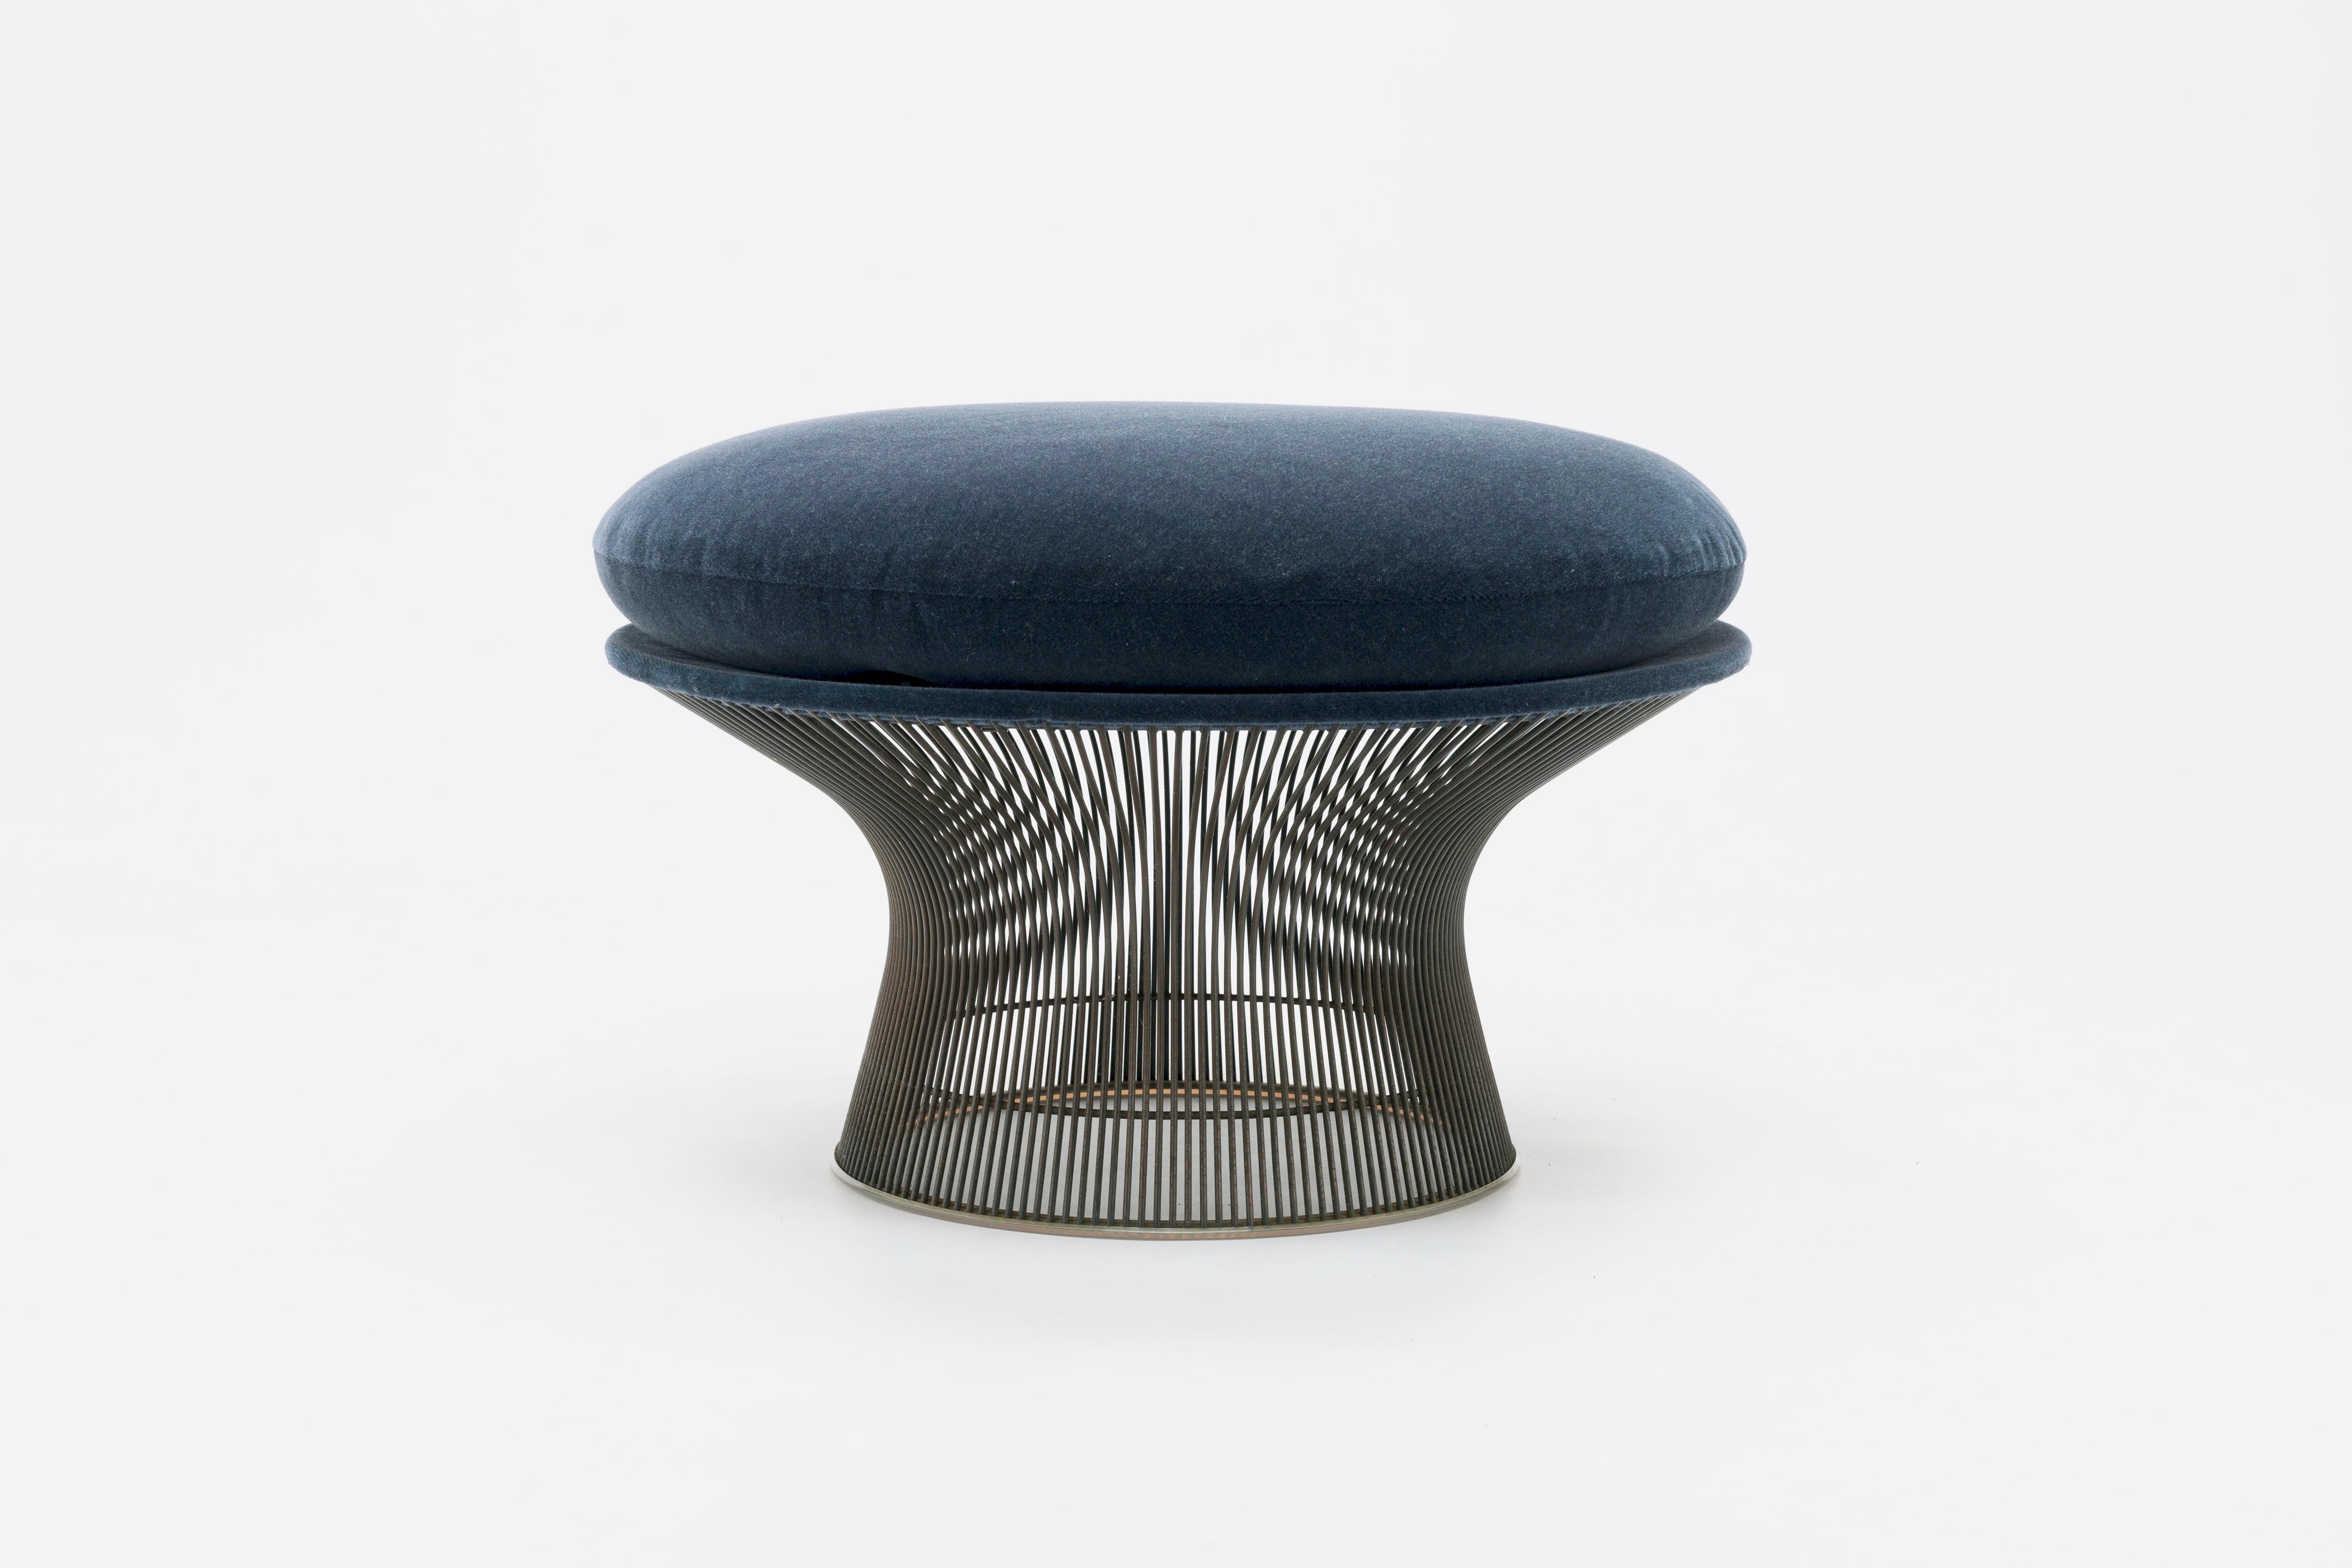 Bronze Warren Platner ottoman from the 1970s upholstered in a Knoll 'Velvet' (Mohair) upholstery.
In the 1960s, American designer Warren Platner transformed steel wire into a sculptural furniture collection, creating what is now considered a design